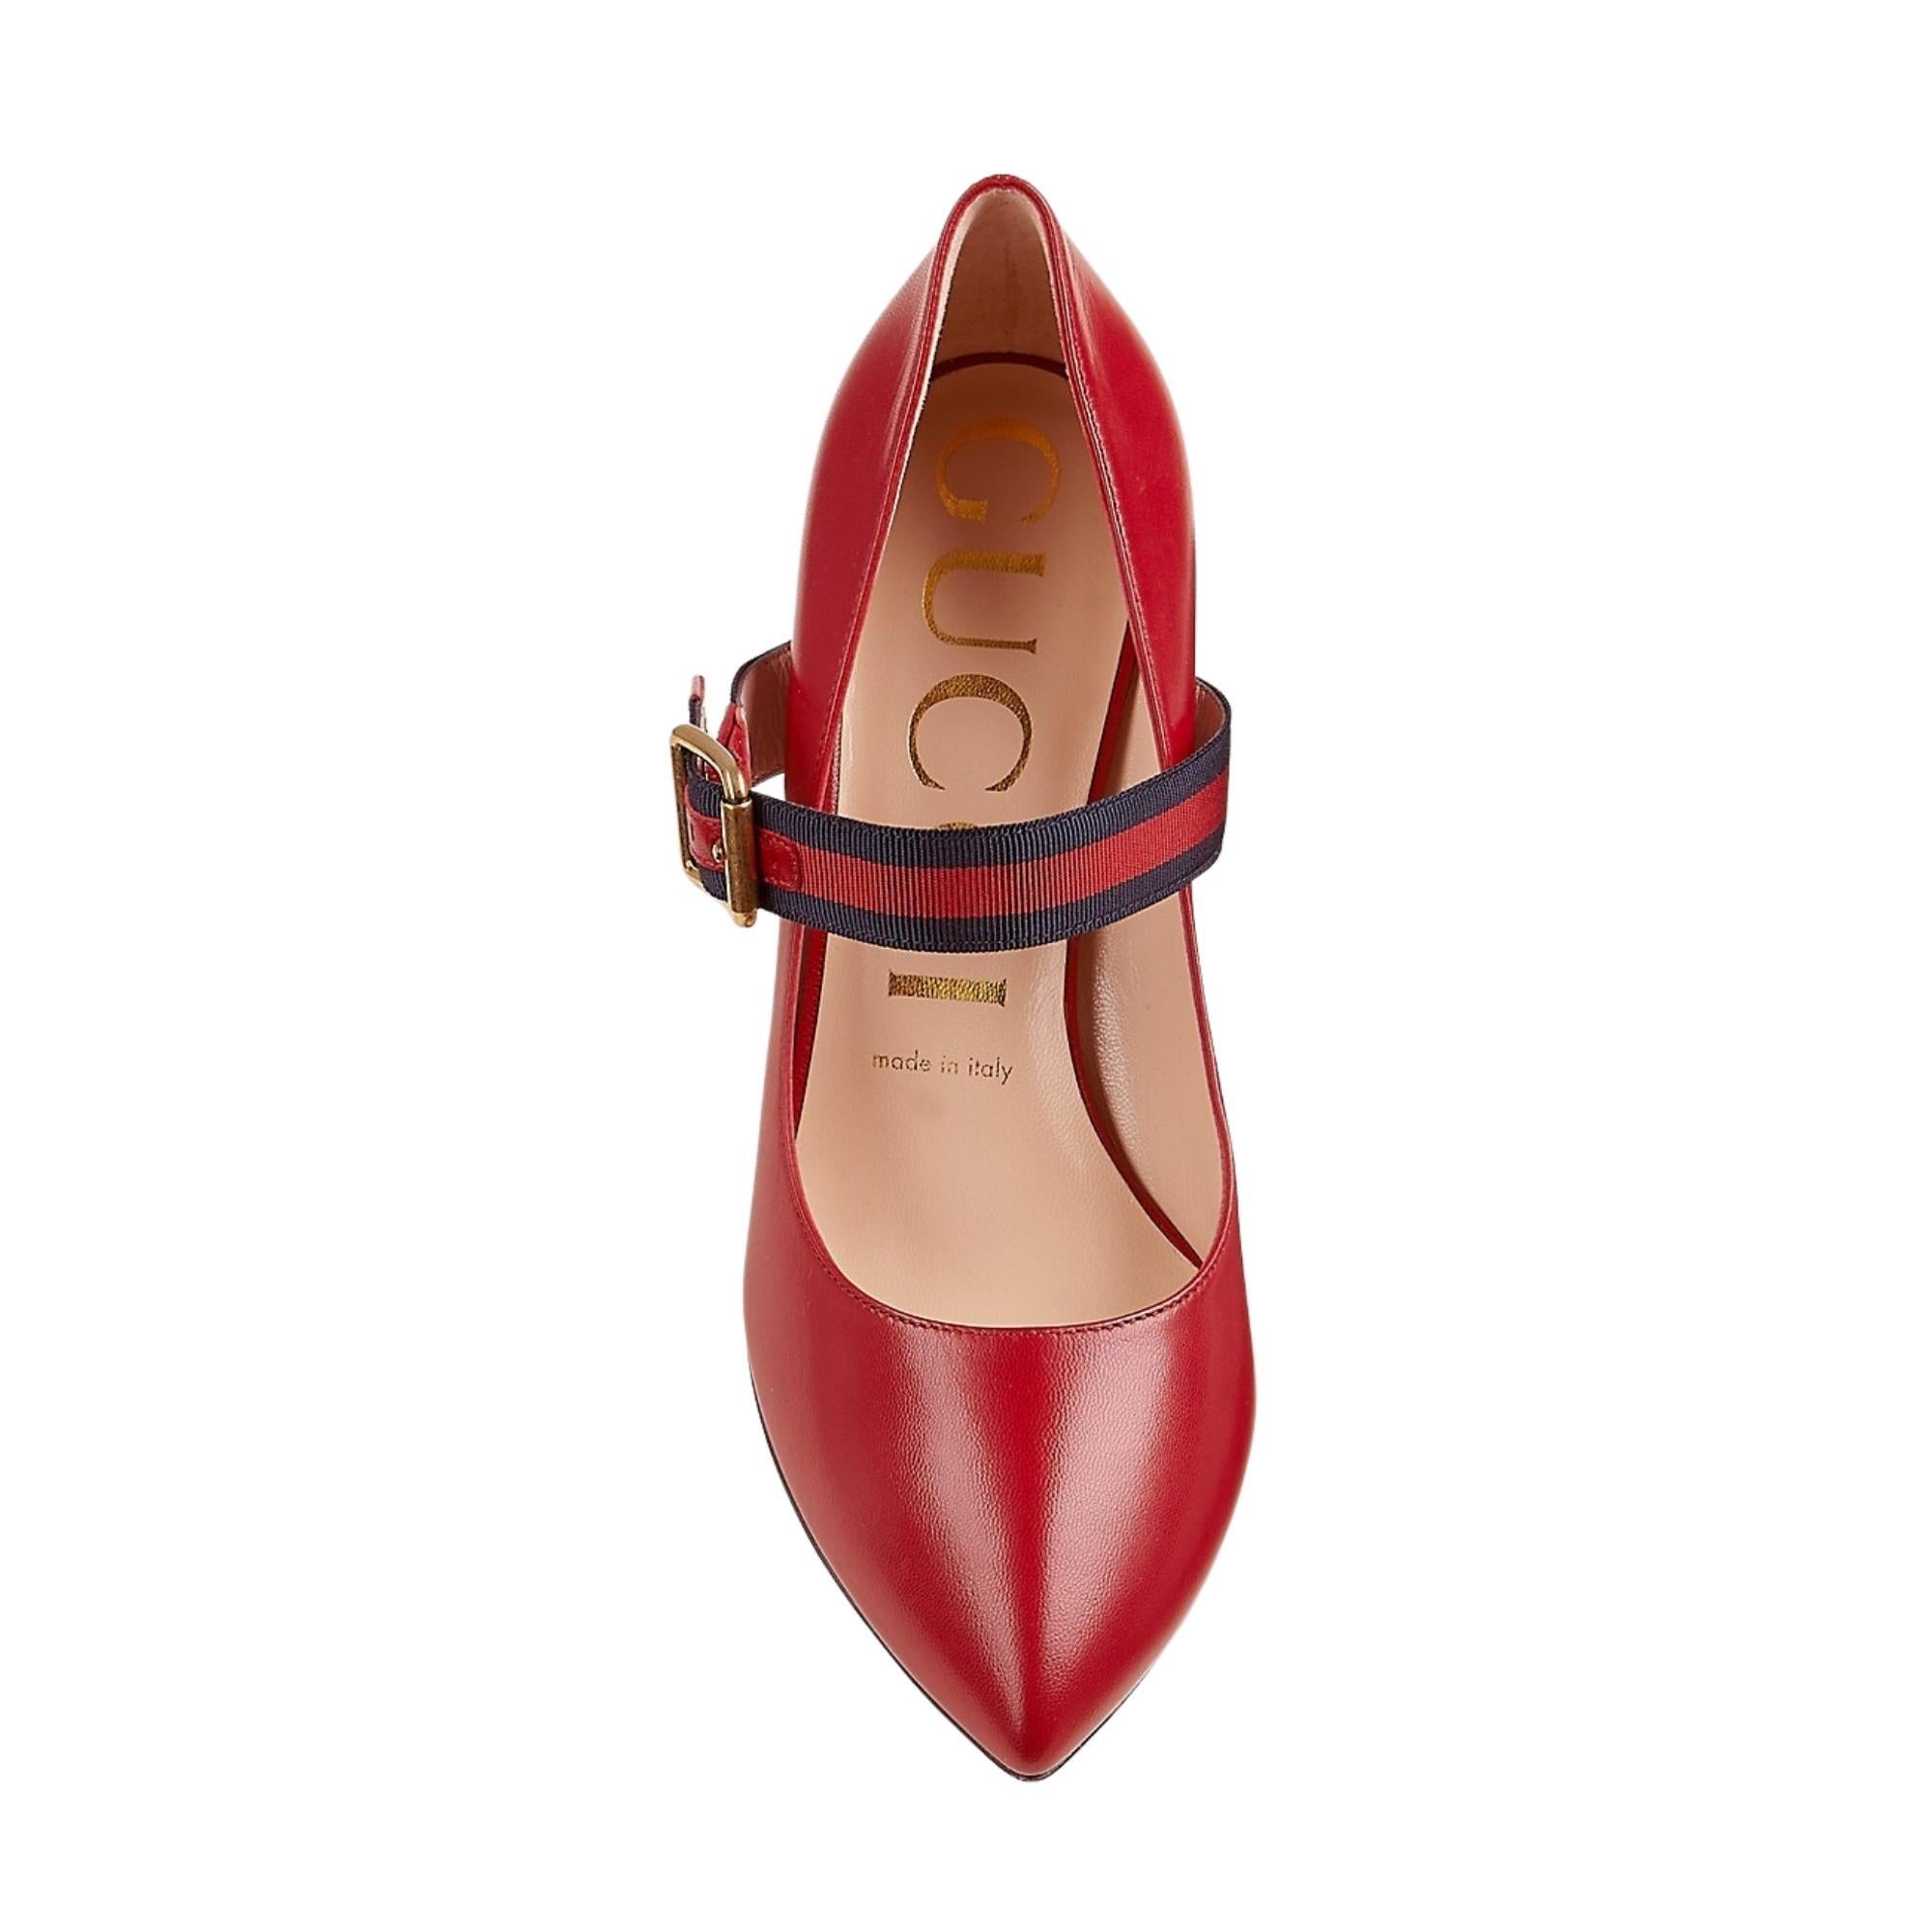 These pumps are made of leather and feature a grosgrain/web strap, a pointed toe, a 3 inch heel, gold tone hardware, an adjustable ankle strap and leather lining and sole.

COLOR: Red
MATERIAL: Leather
ITEM CODE: 475086 36 05D
SIZE: 36 EU / 5